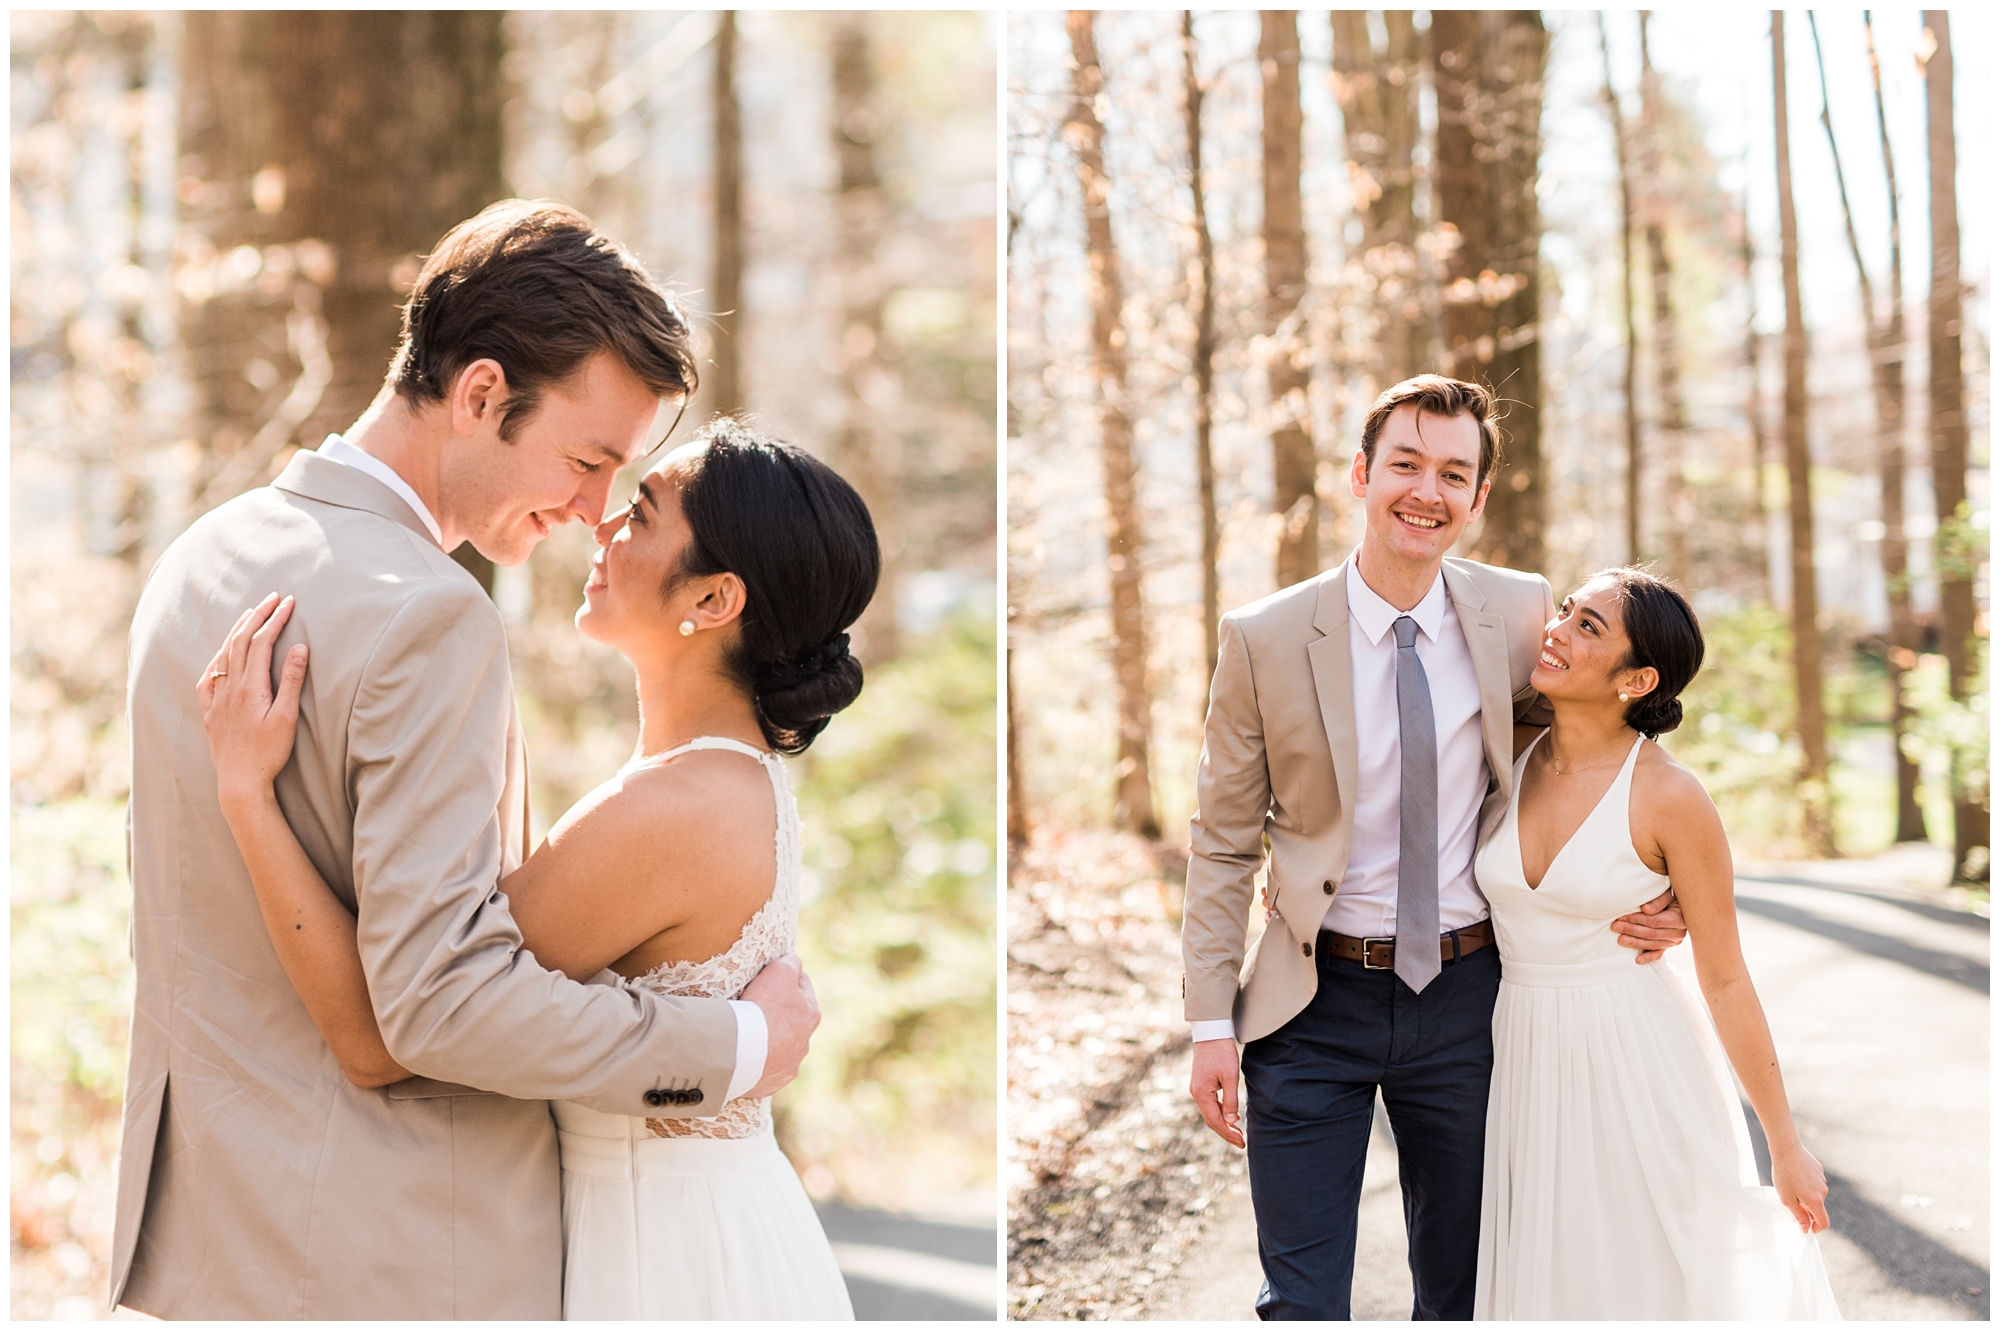 Intimate elopement in the woods in Central Virginia